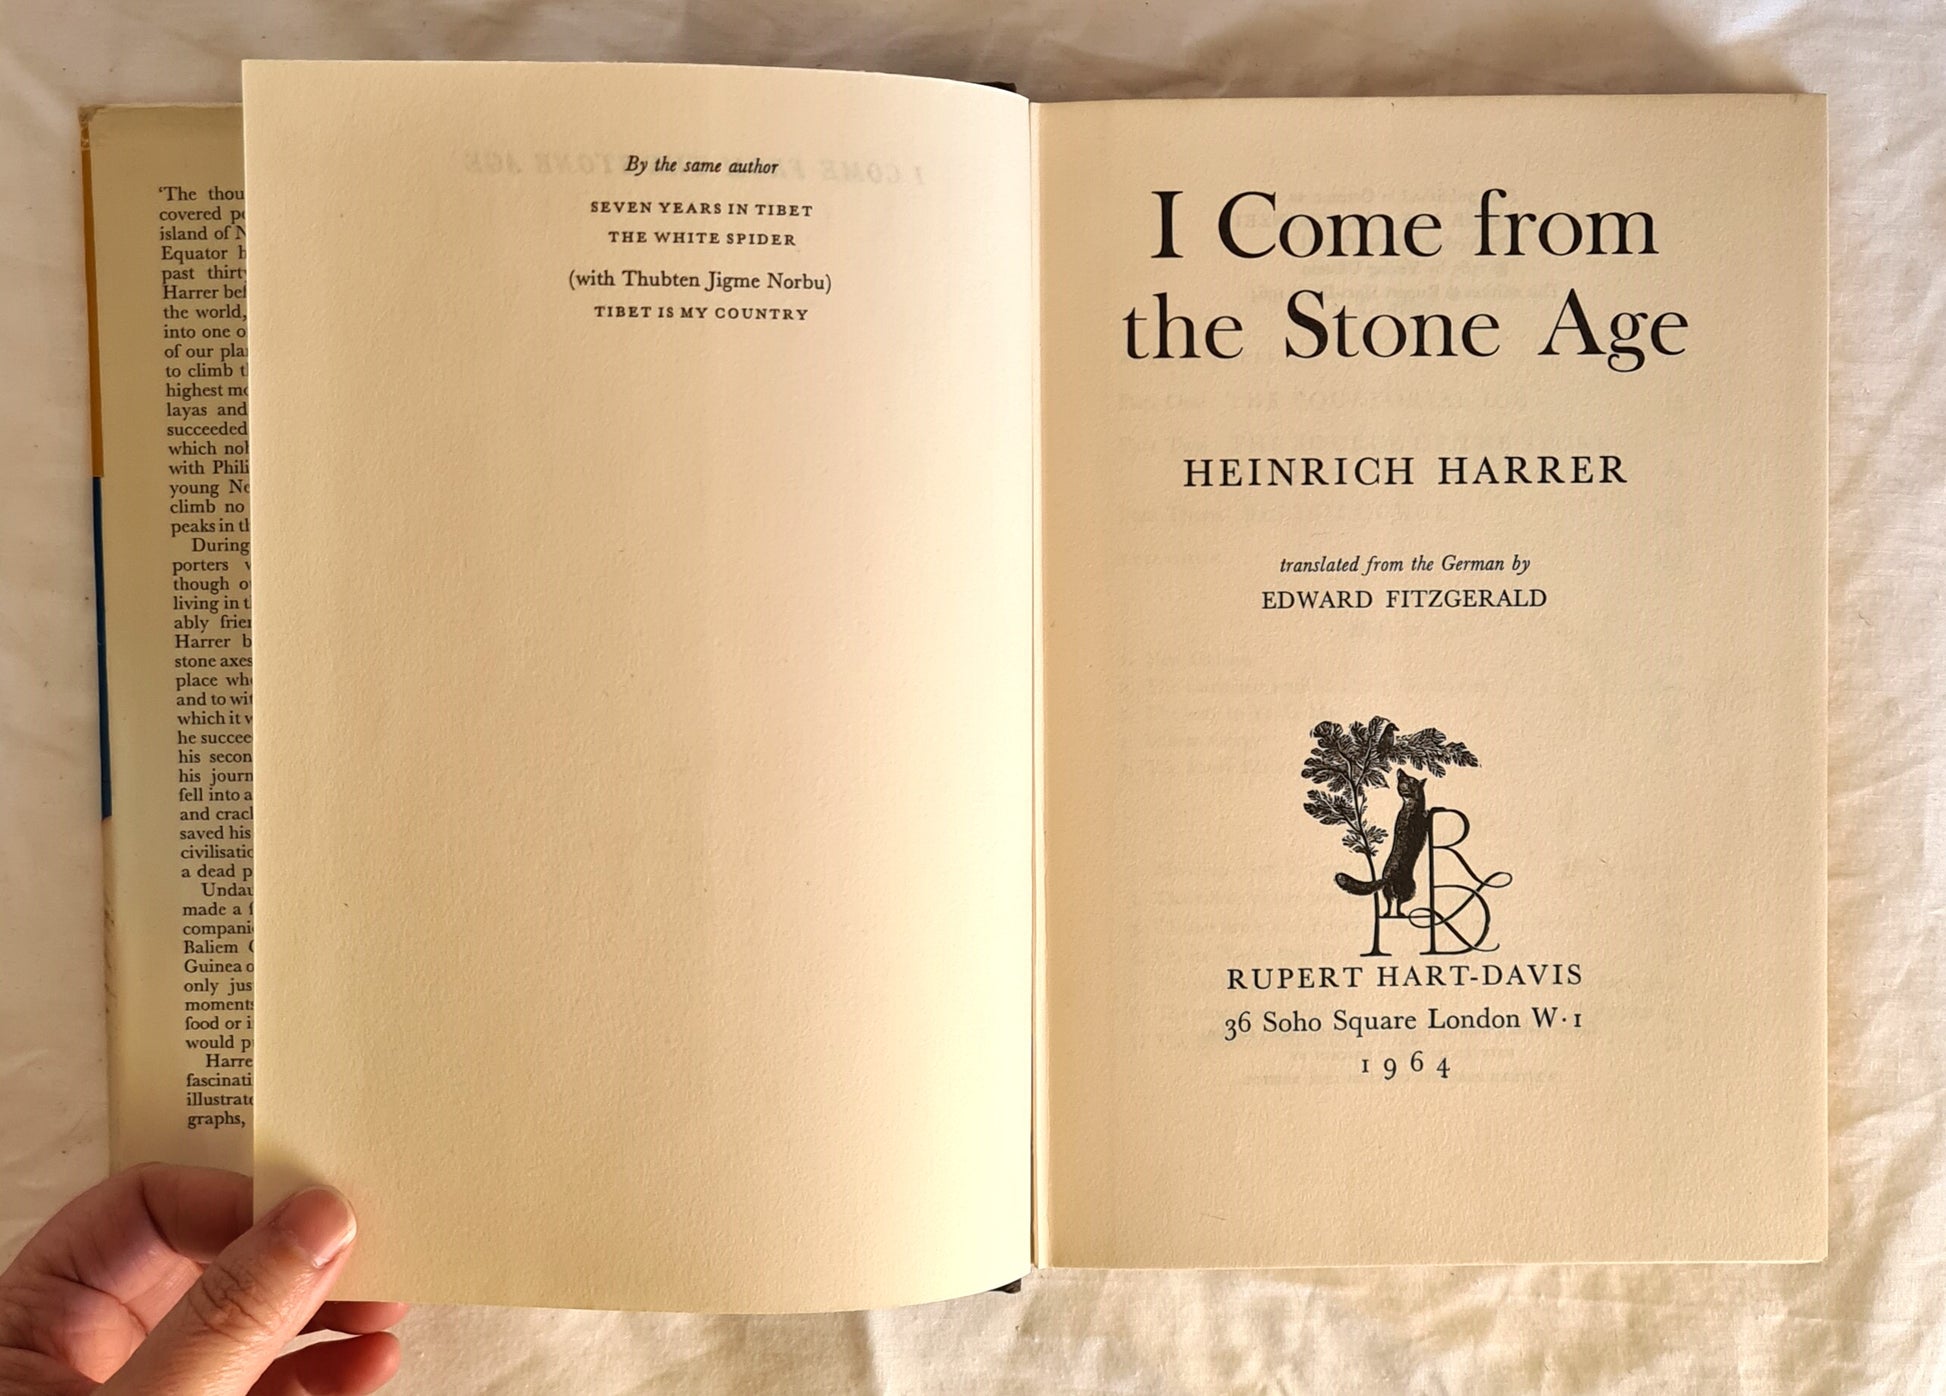 I Come From the Stone Age  by Henrich Harrer  Translated by Edward Fitzgerald